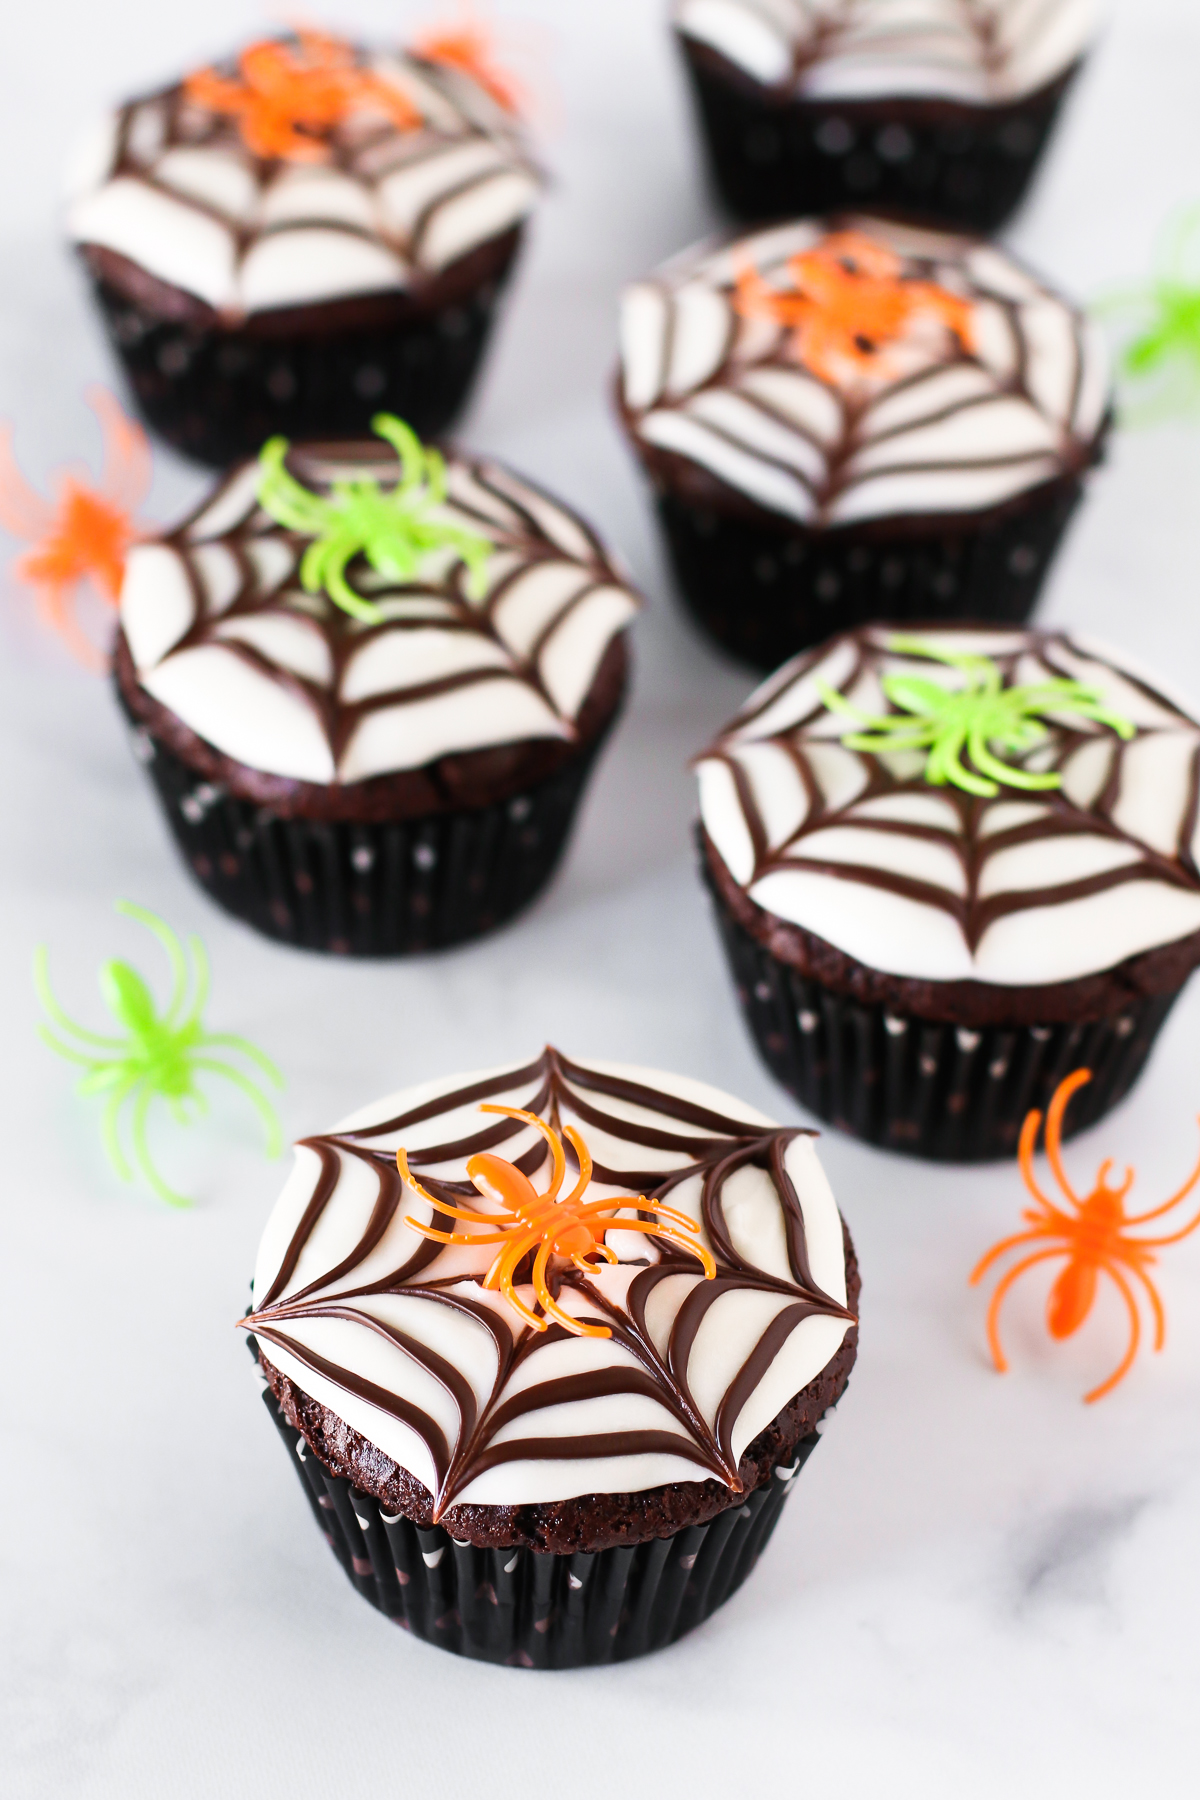 Gluten Free Vegan Chocolate Spiderweb Cookies. The kids won’t be able to resist these SPOOKALICIOUS allergen-free cupcakes! 